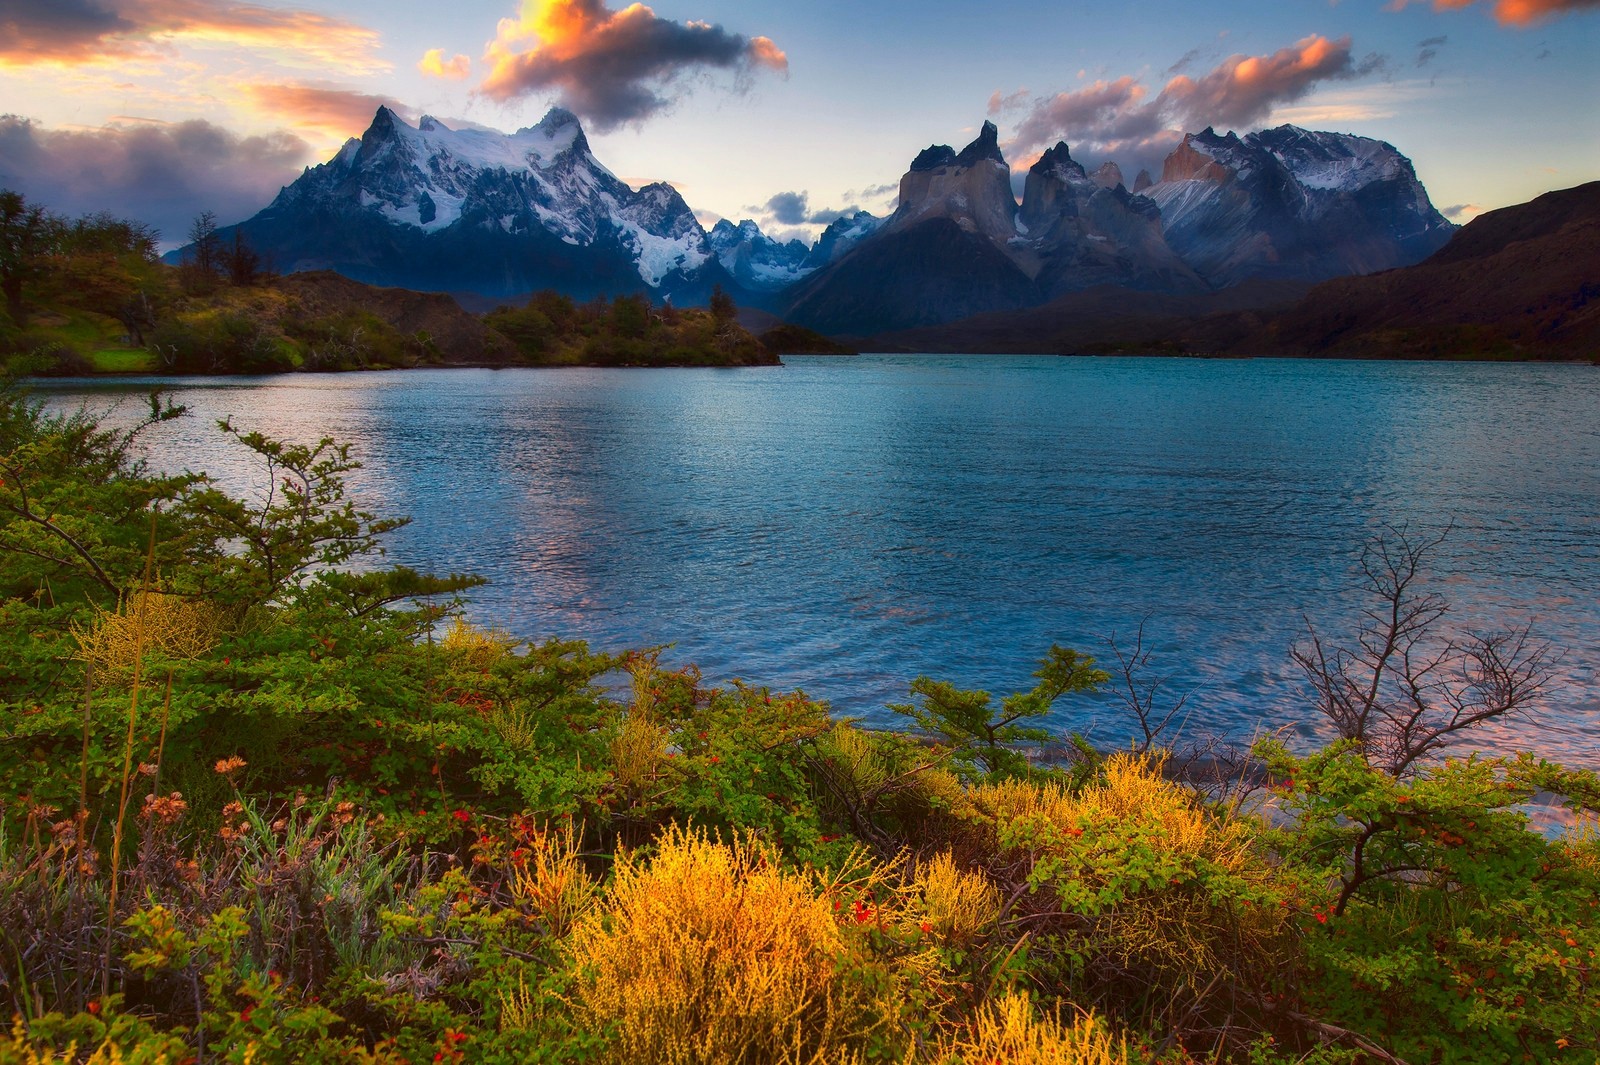 General 1600x1065 nature landscape lake sunset spring mountains snowy peak shrubs wildflowers Torres del Paine national park Chile Patagonia South America